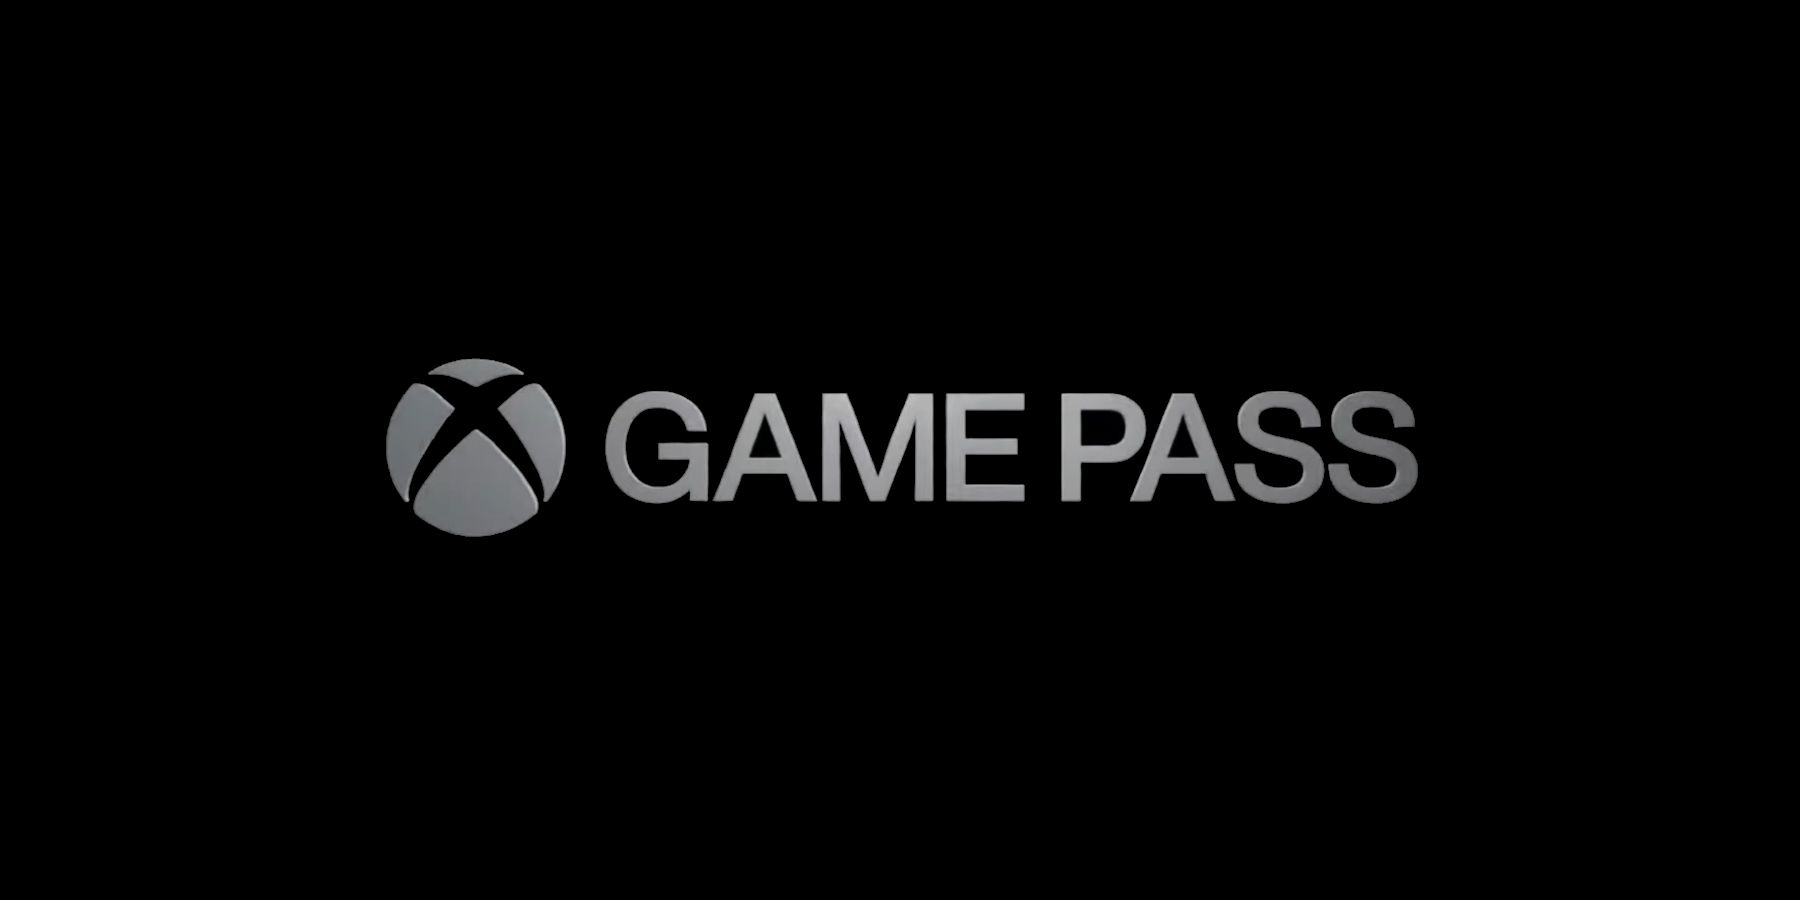 Coming Soon to Xbox Game Pass: Back 4 Blood, Destiny 2: Beyond